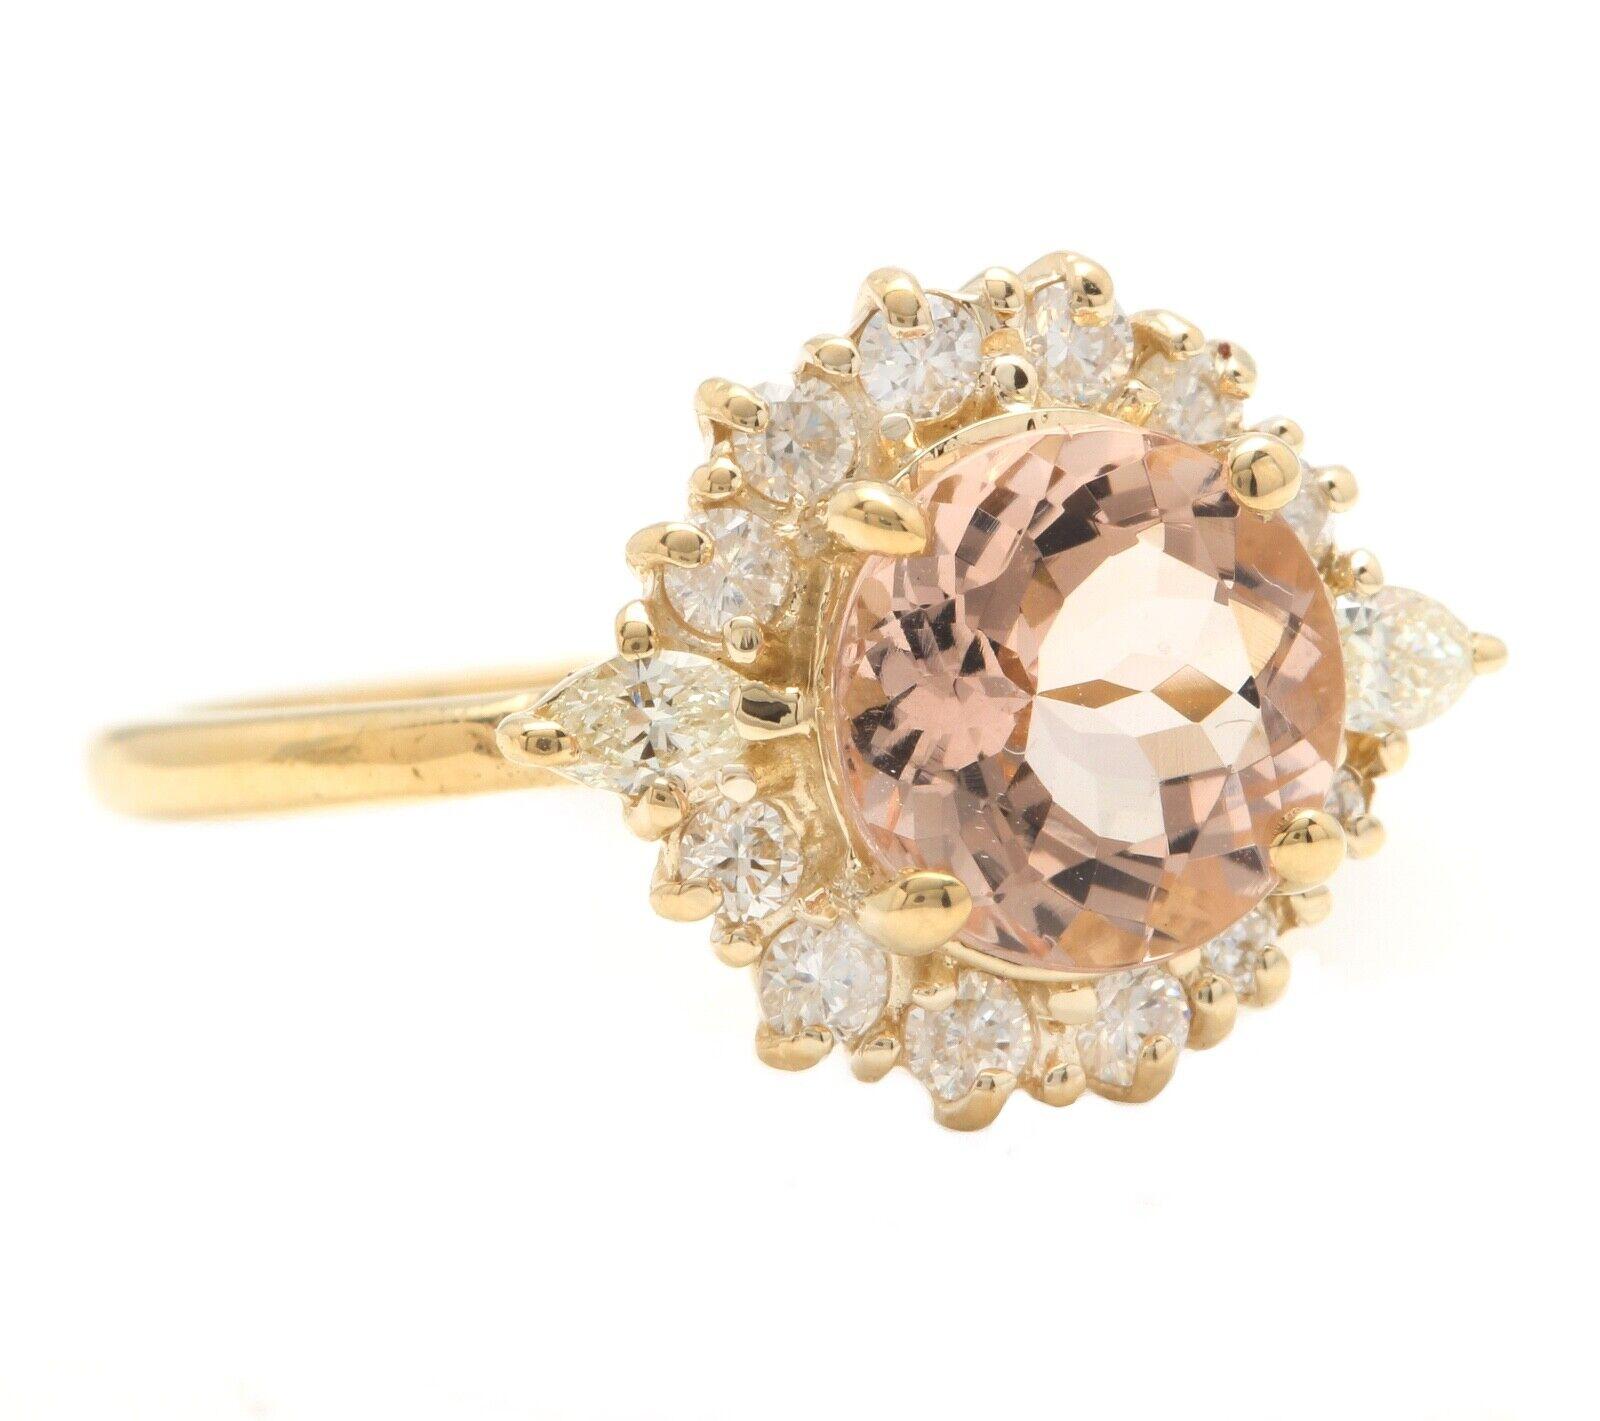 2.50 Carats Impressive Natural Morganite and Diamond 14K Solid Yellow Gold Ring

Suggested Replacement Value: Approx. $4,500.00

Total Natural Round Morganite Weight is: Approx. 2.00 Carats

Morganite Treatment: Heating

Morganite Measures: Approx.